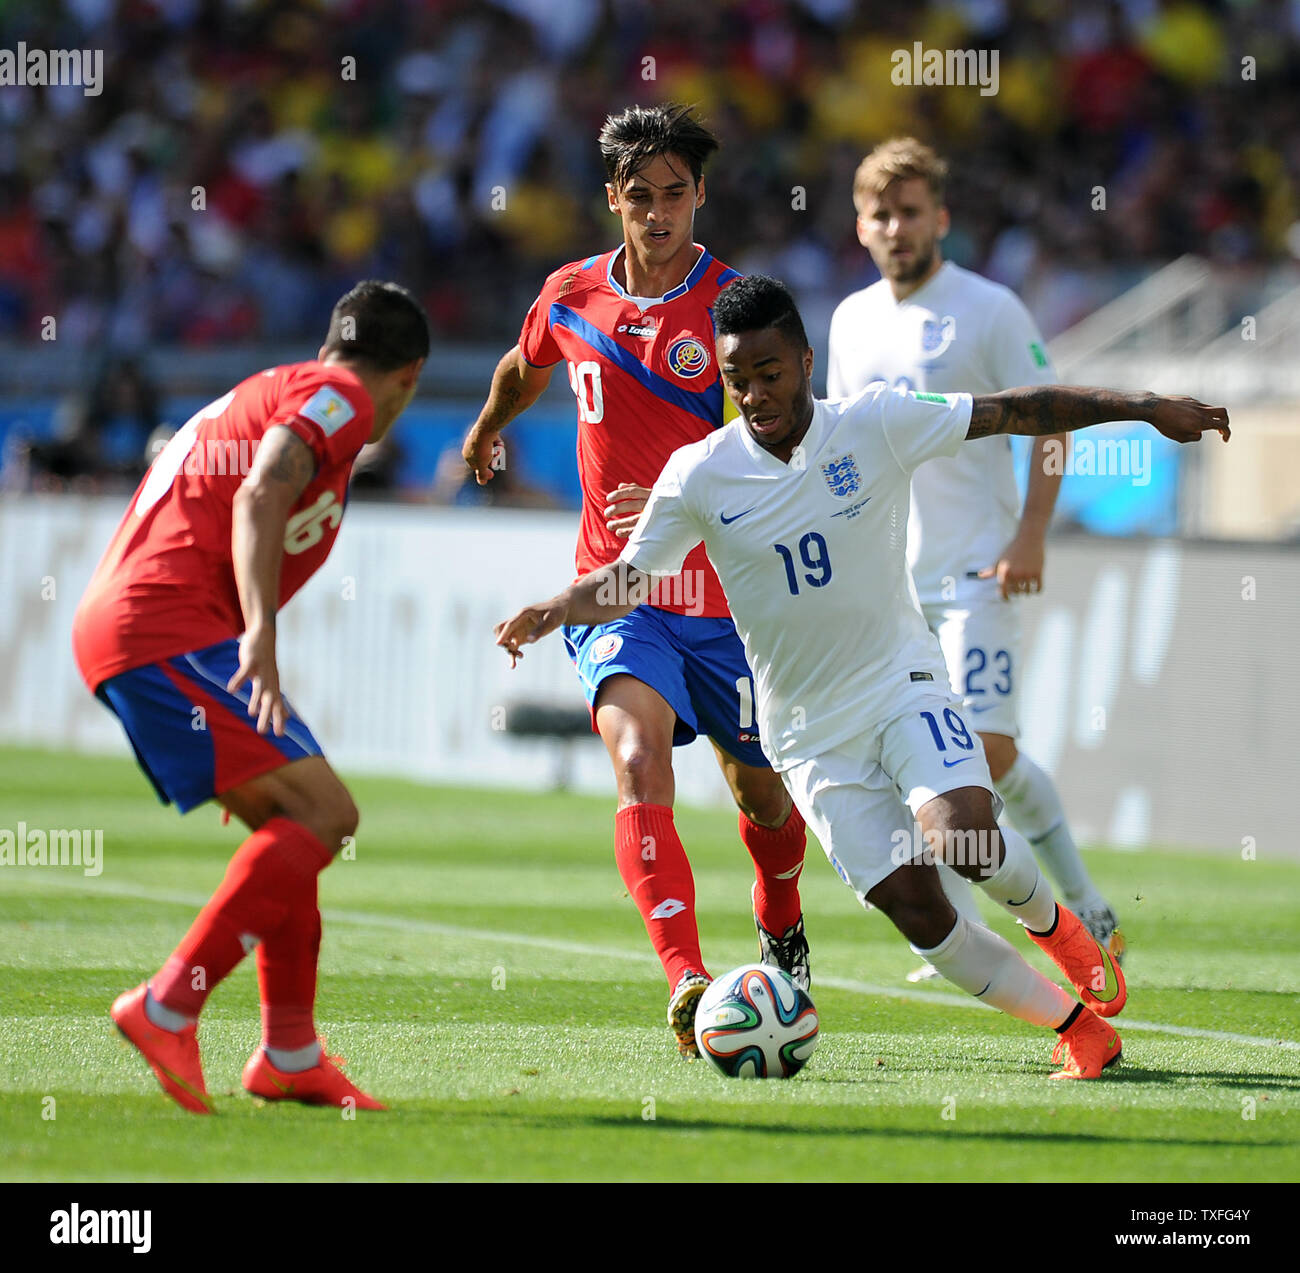 Bryan Ruiz (C) of Costa Rica chases Raheem Sterling of England during the 2014 FIFA World Cup Group D match at the Estadio Mineirao in Belo Horizonte, Brazil on June 24, 2014. UPI/Chris Brunskill Stock Photo